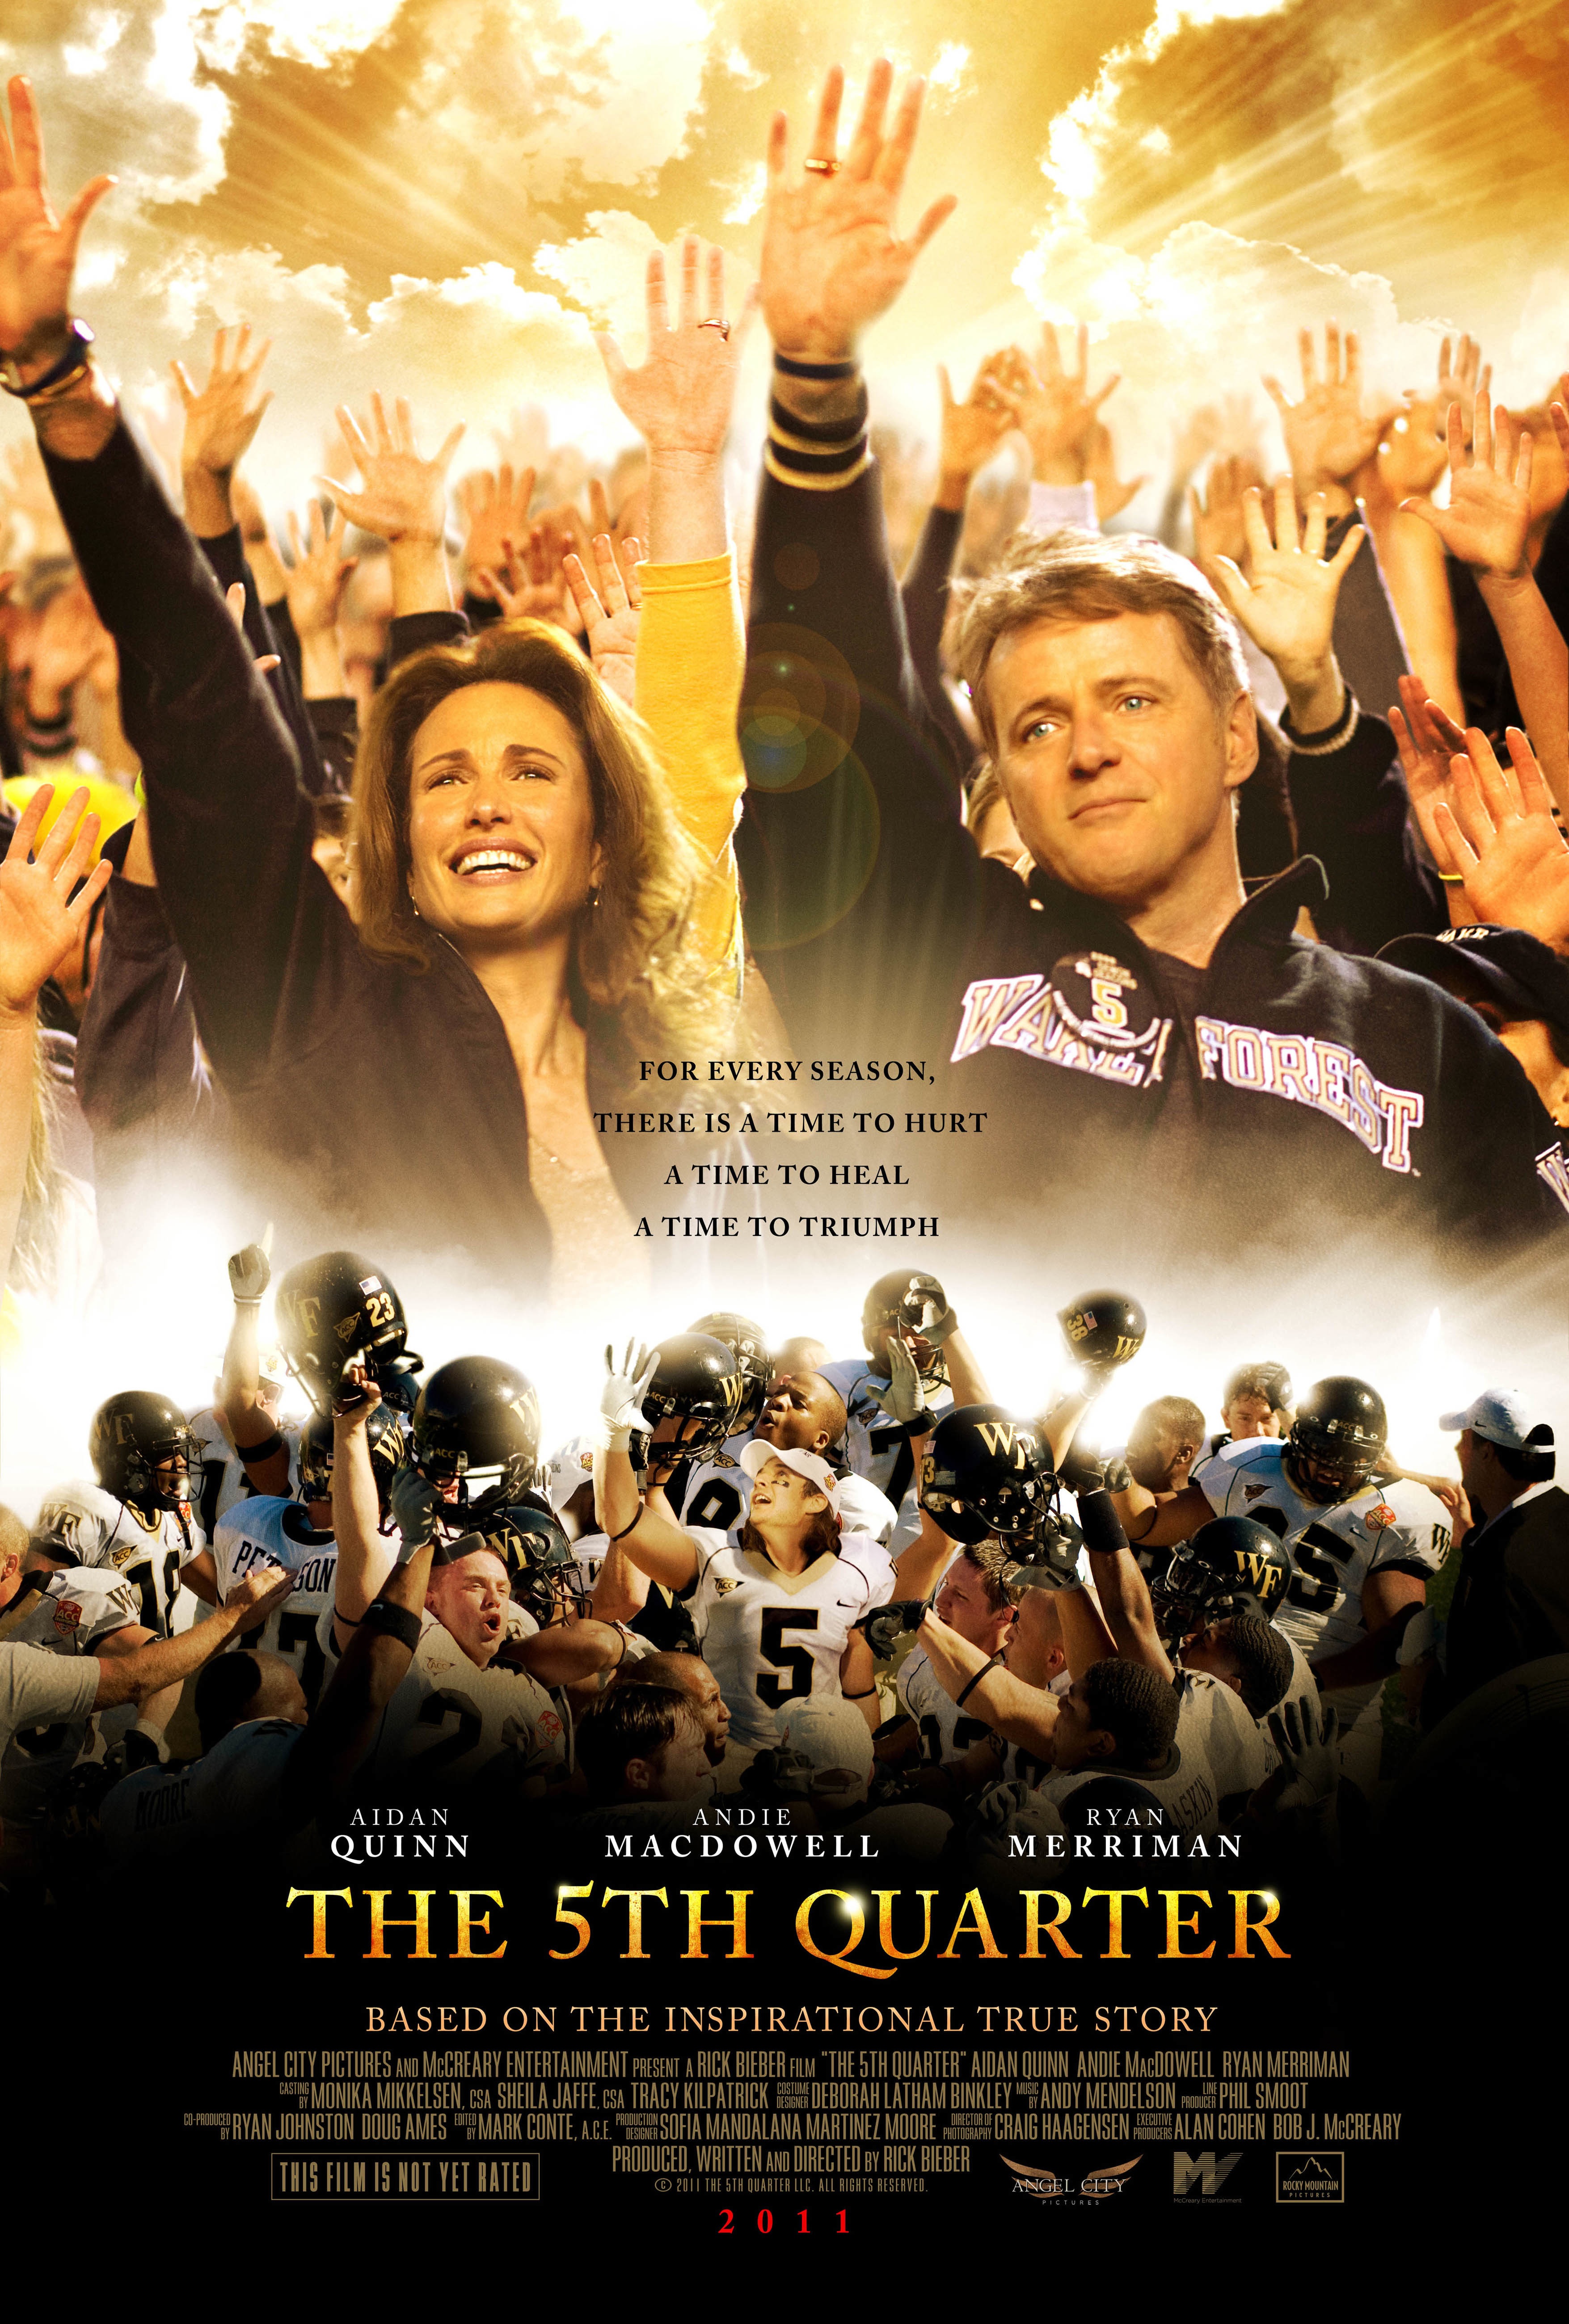 Co-Producer on The 5th Quarter starring Aidan Quinn, Ryan Merriman, and Andie MacDowell.